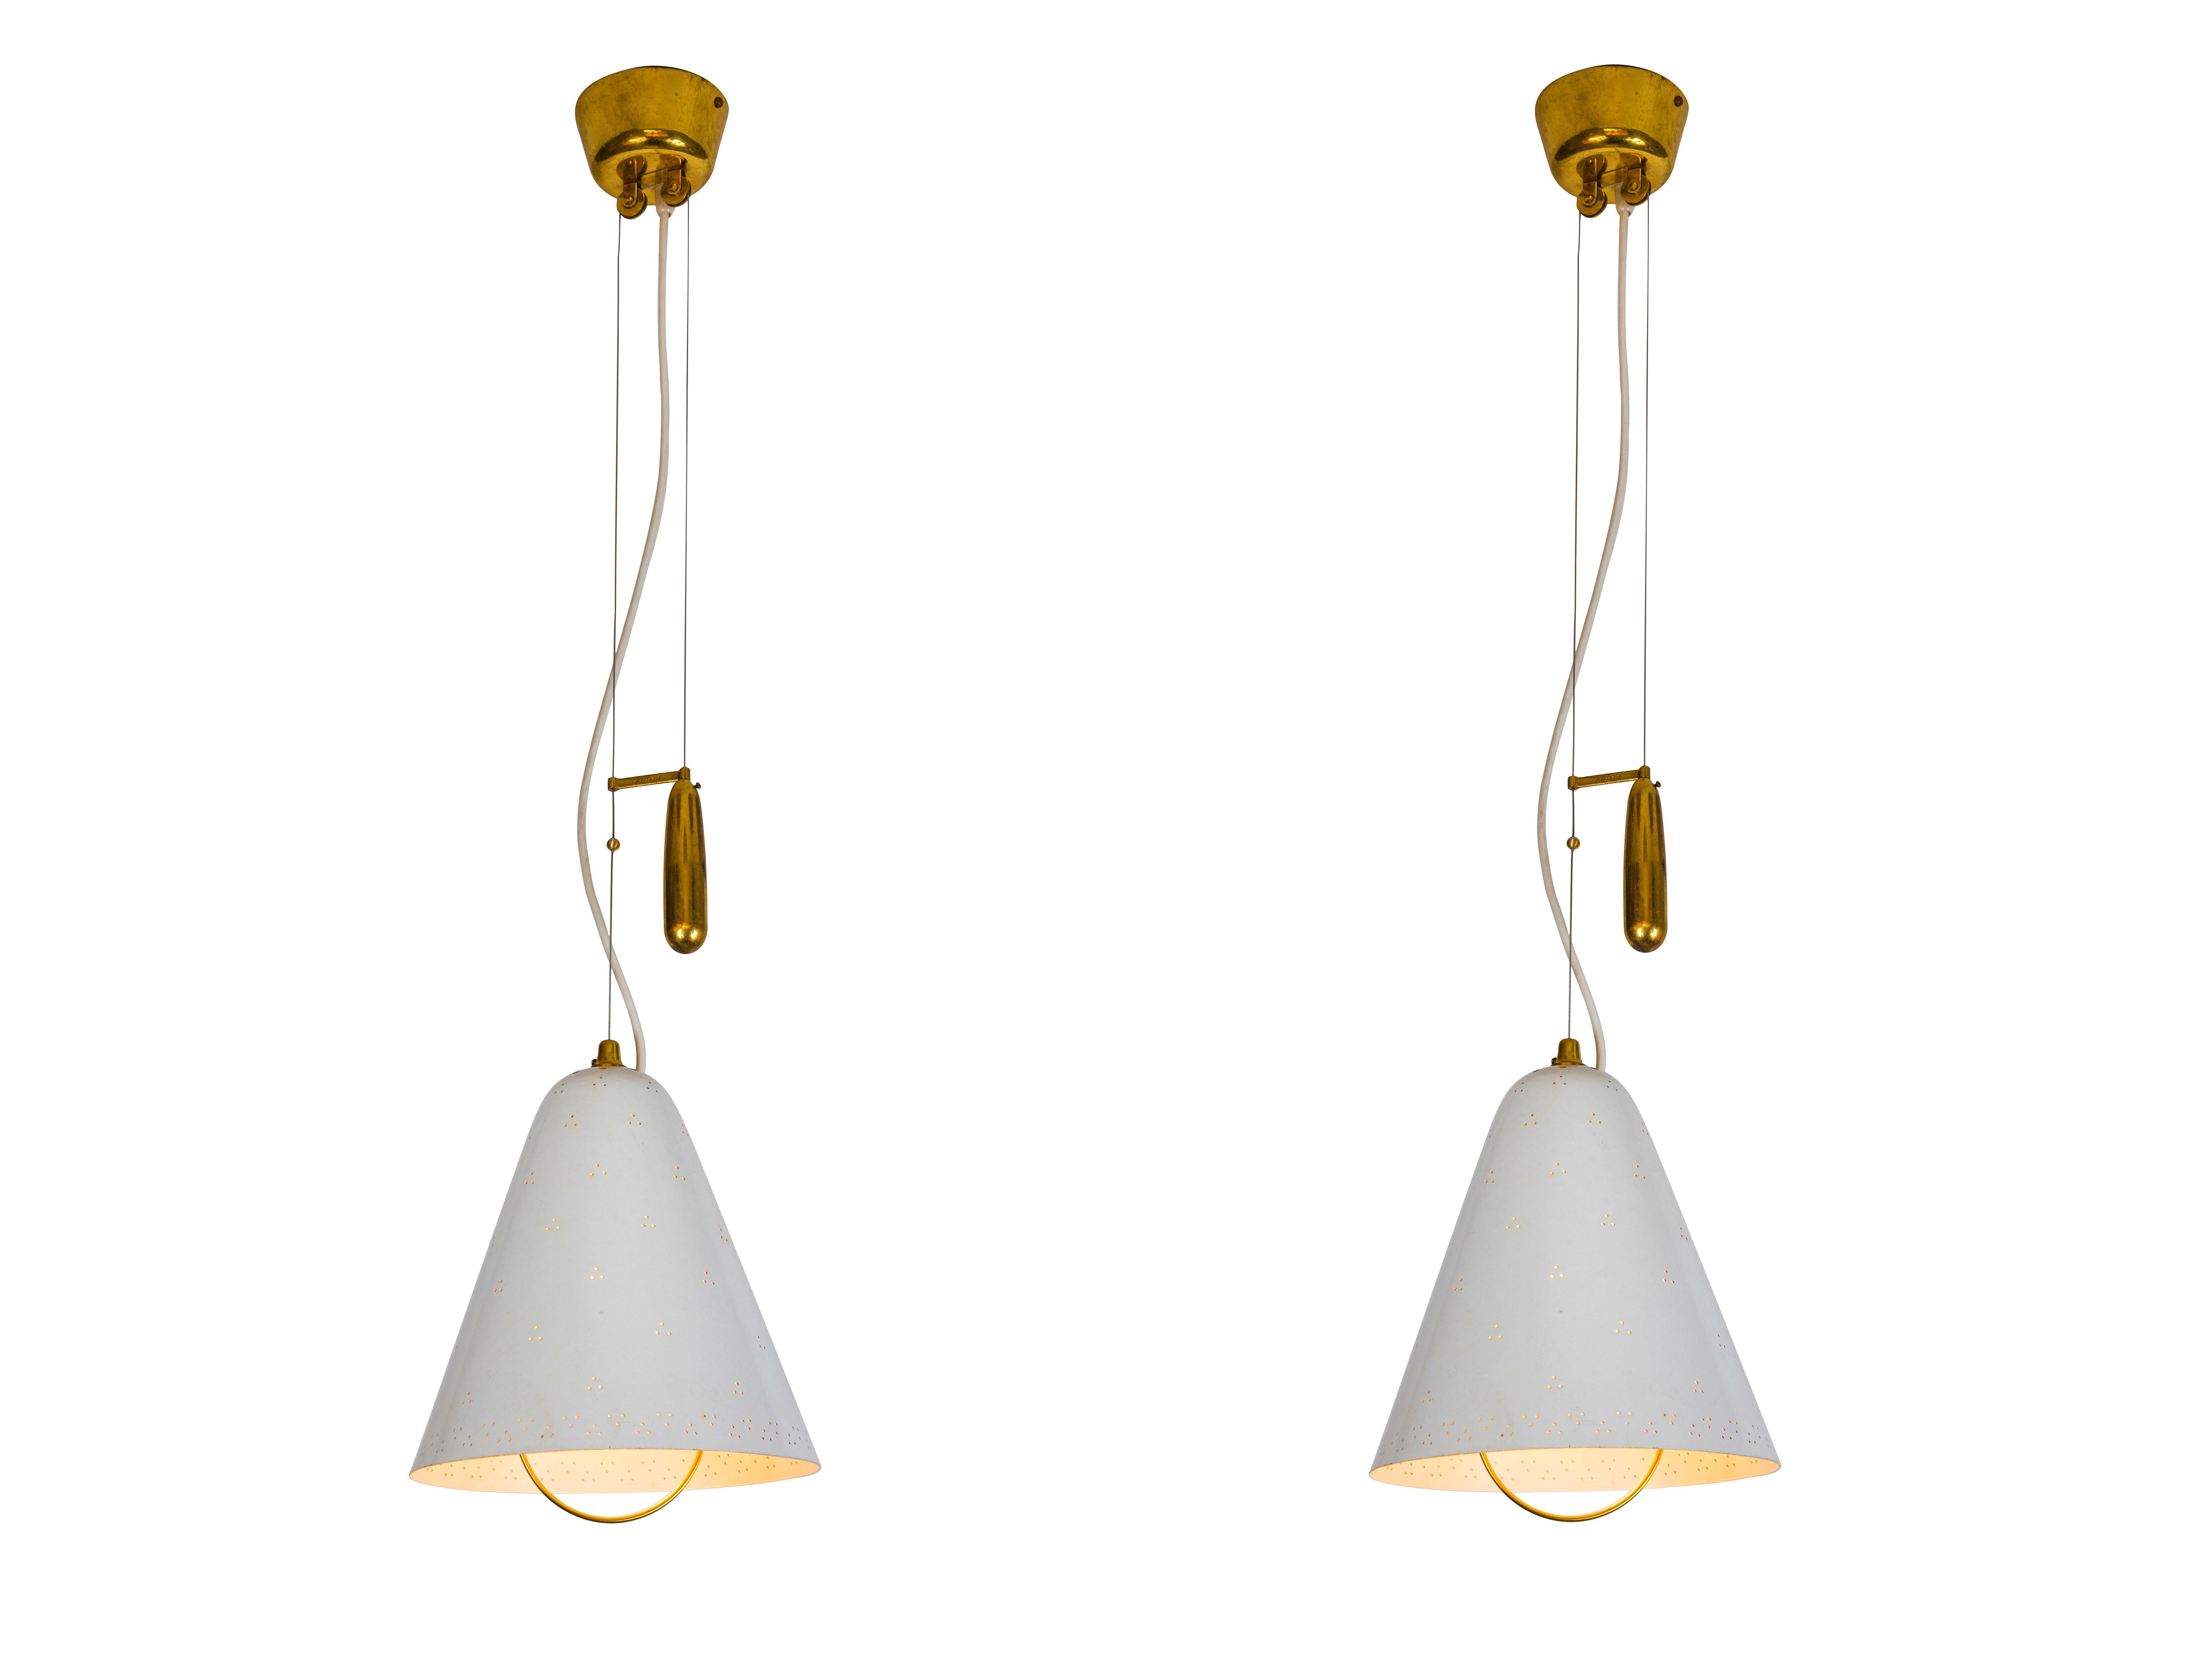 Pair of 1940s Paavo Tynell 'A1942' counterweight pendants for Idman Oy. This rare and exceptionally pair is executed in white painted perforated metal and brass, and can be raised and lowered using its ingenious counterweight and pulley system.